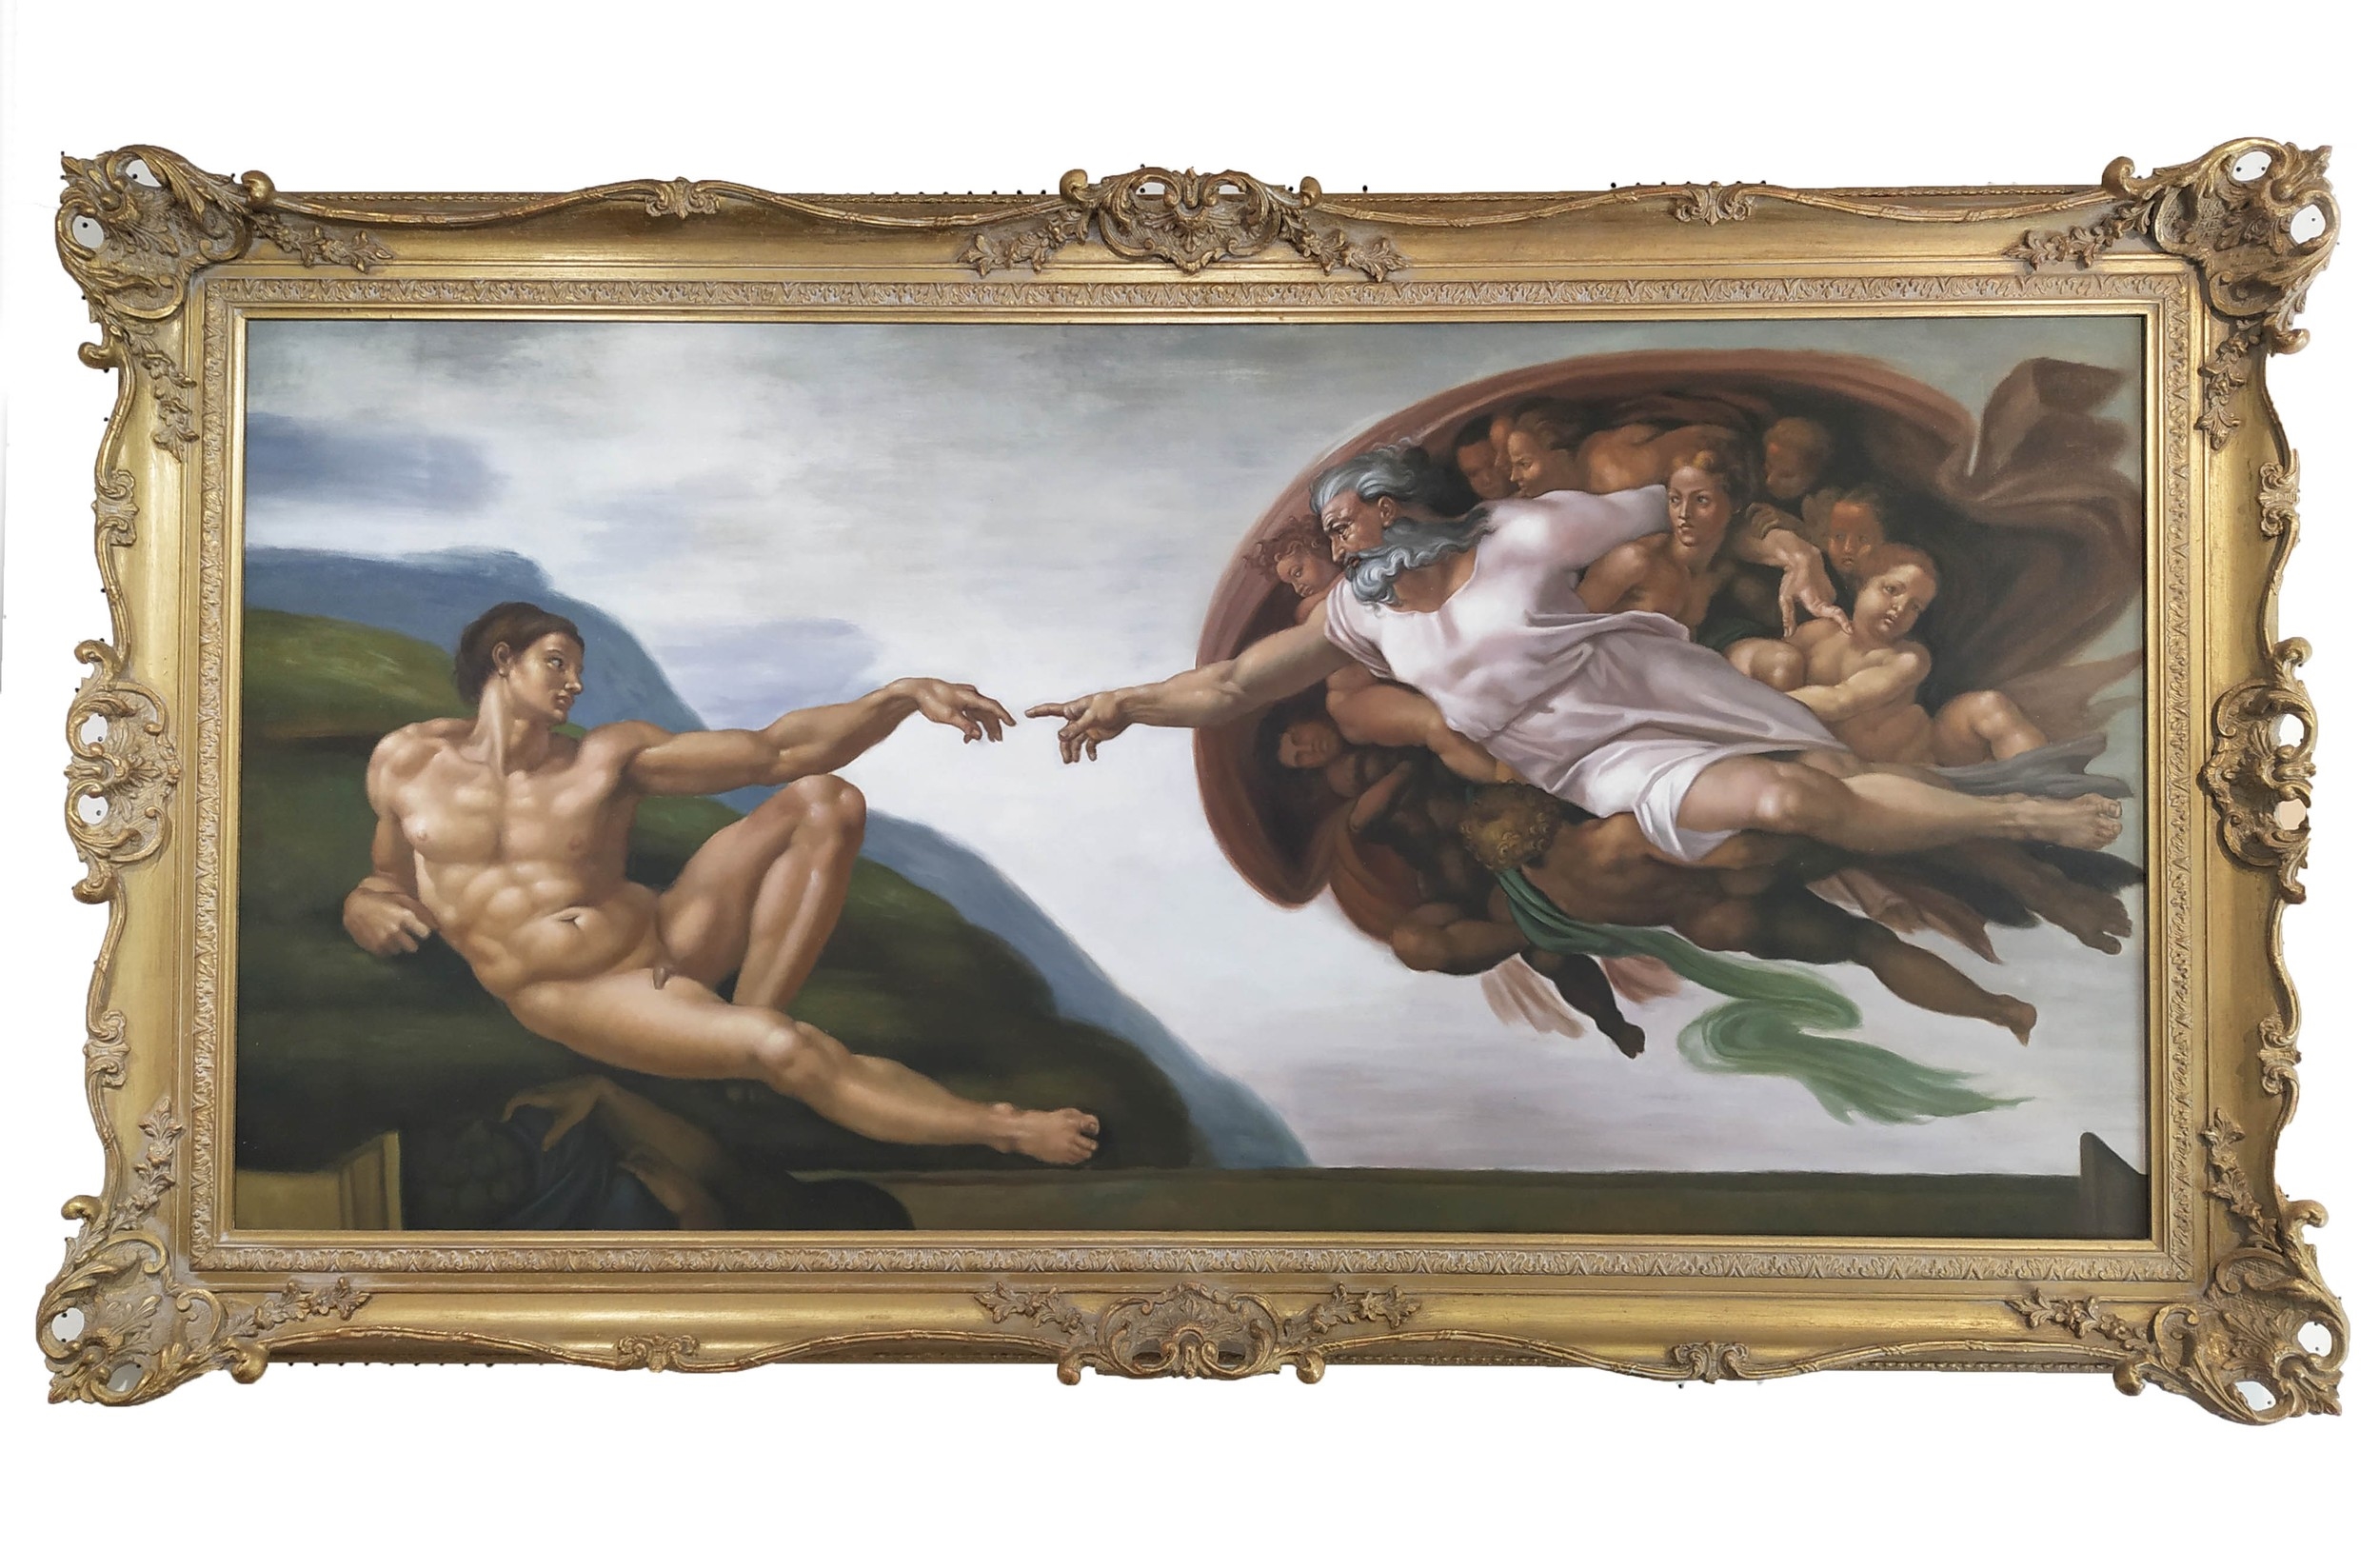 Artwork by Michelangelo, The Creation of Adam, Made of oil on canvas